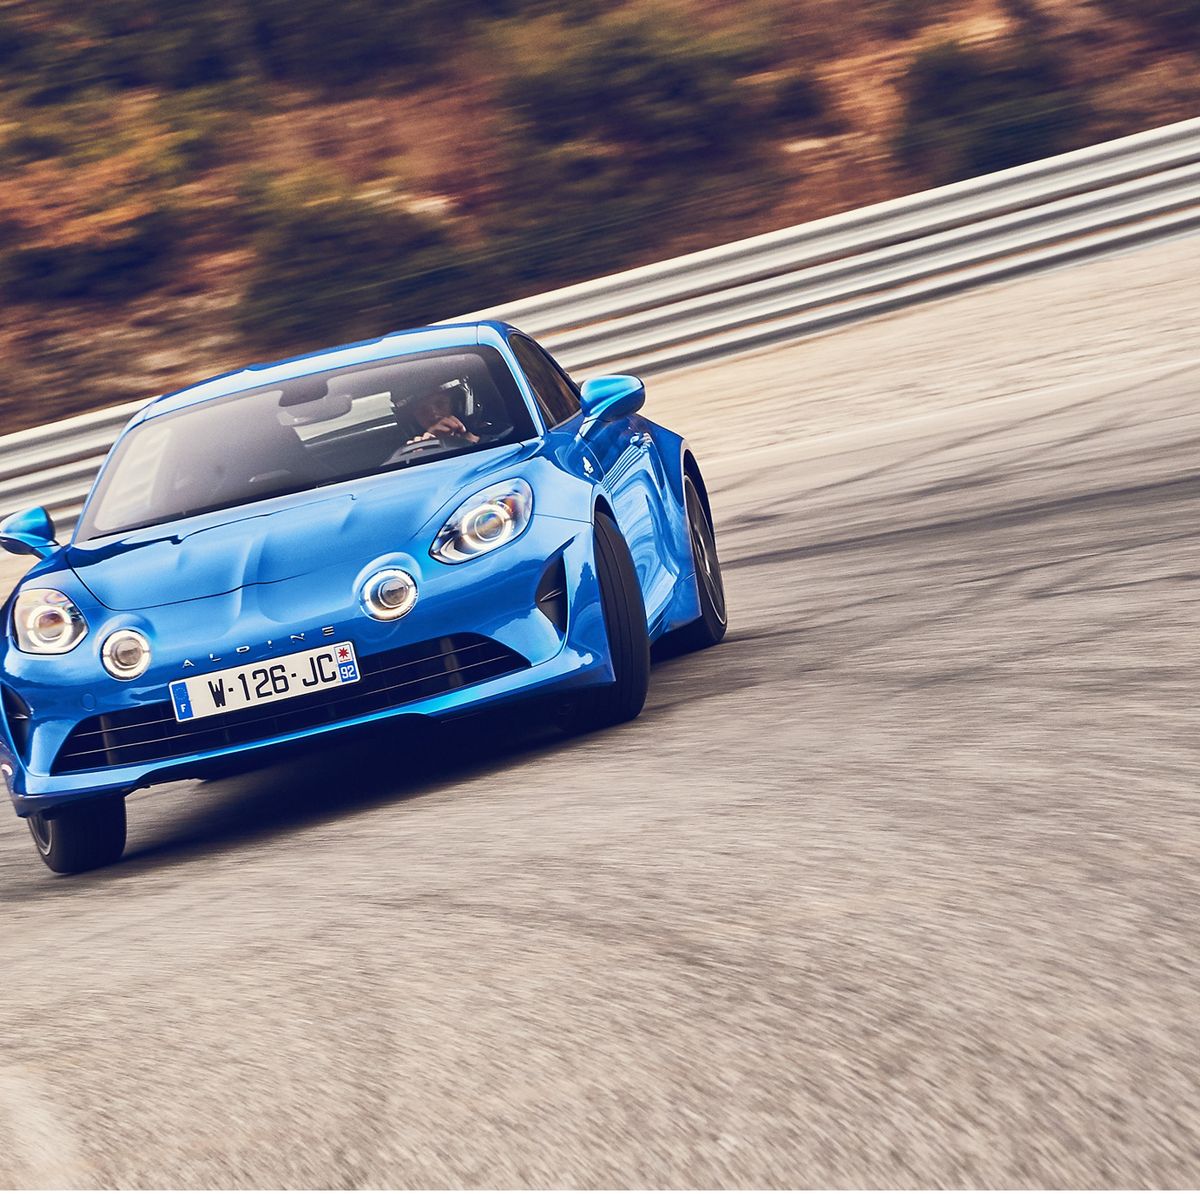 The Alpine A110 Is a Mid-Engined Sports Car from Renault